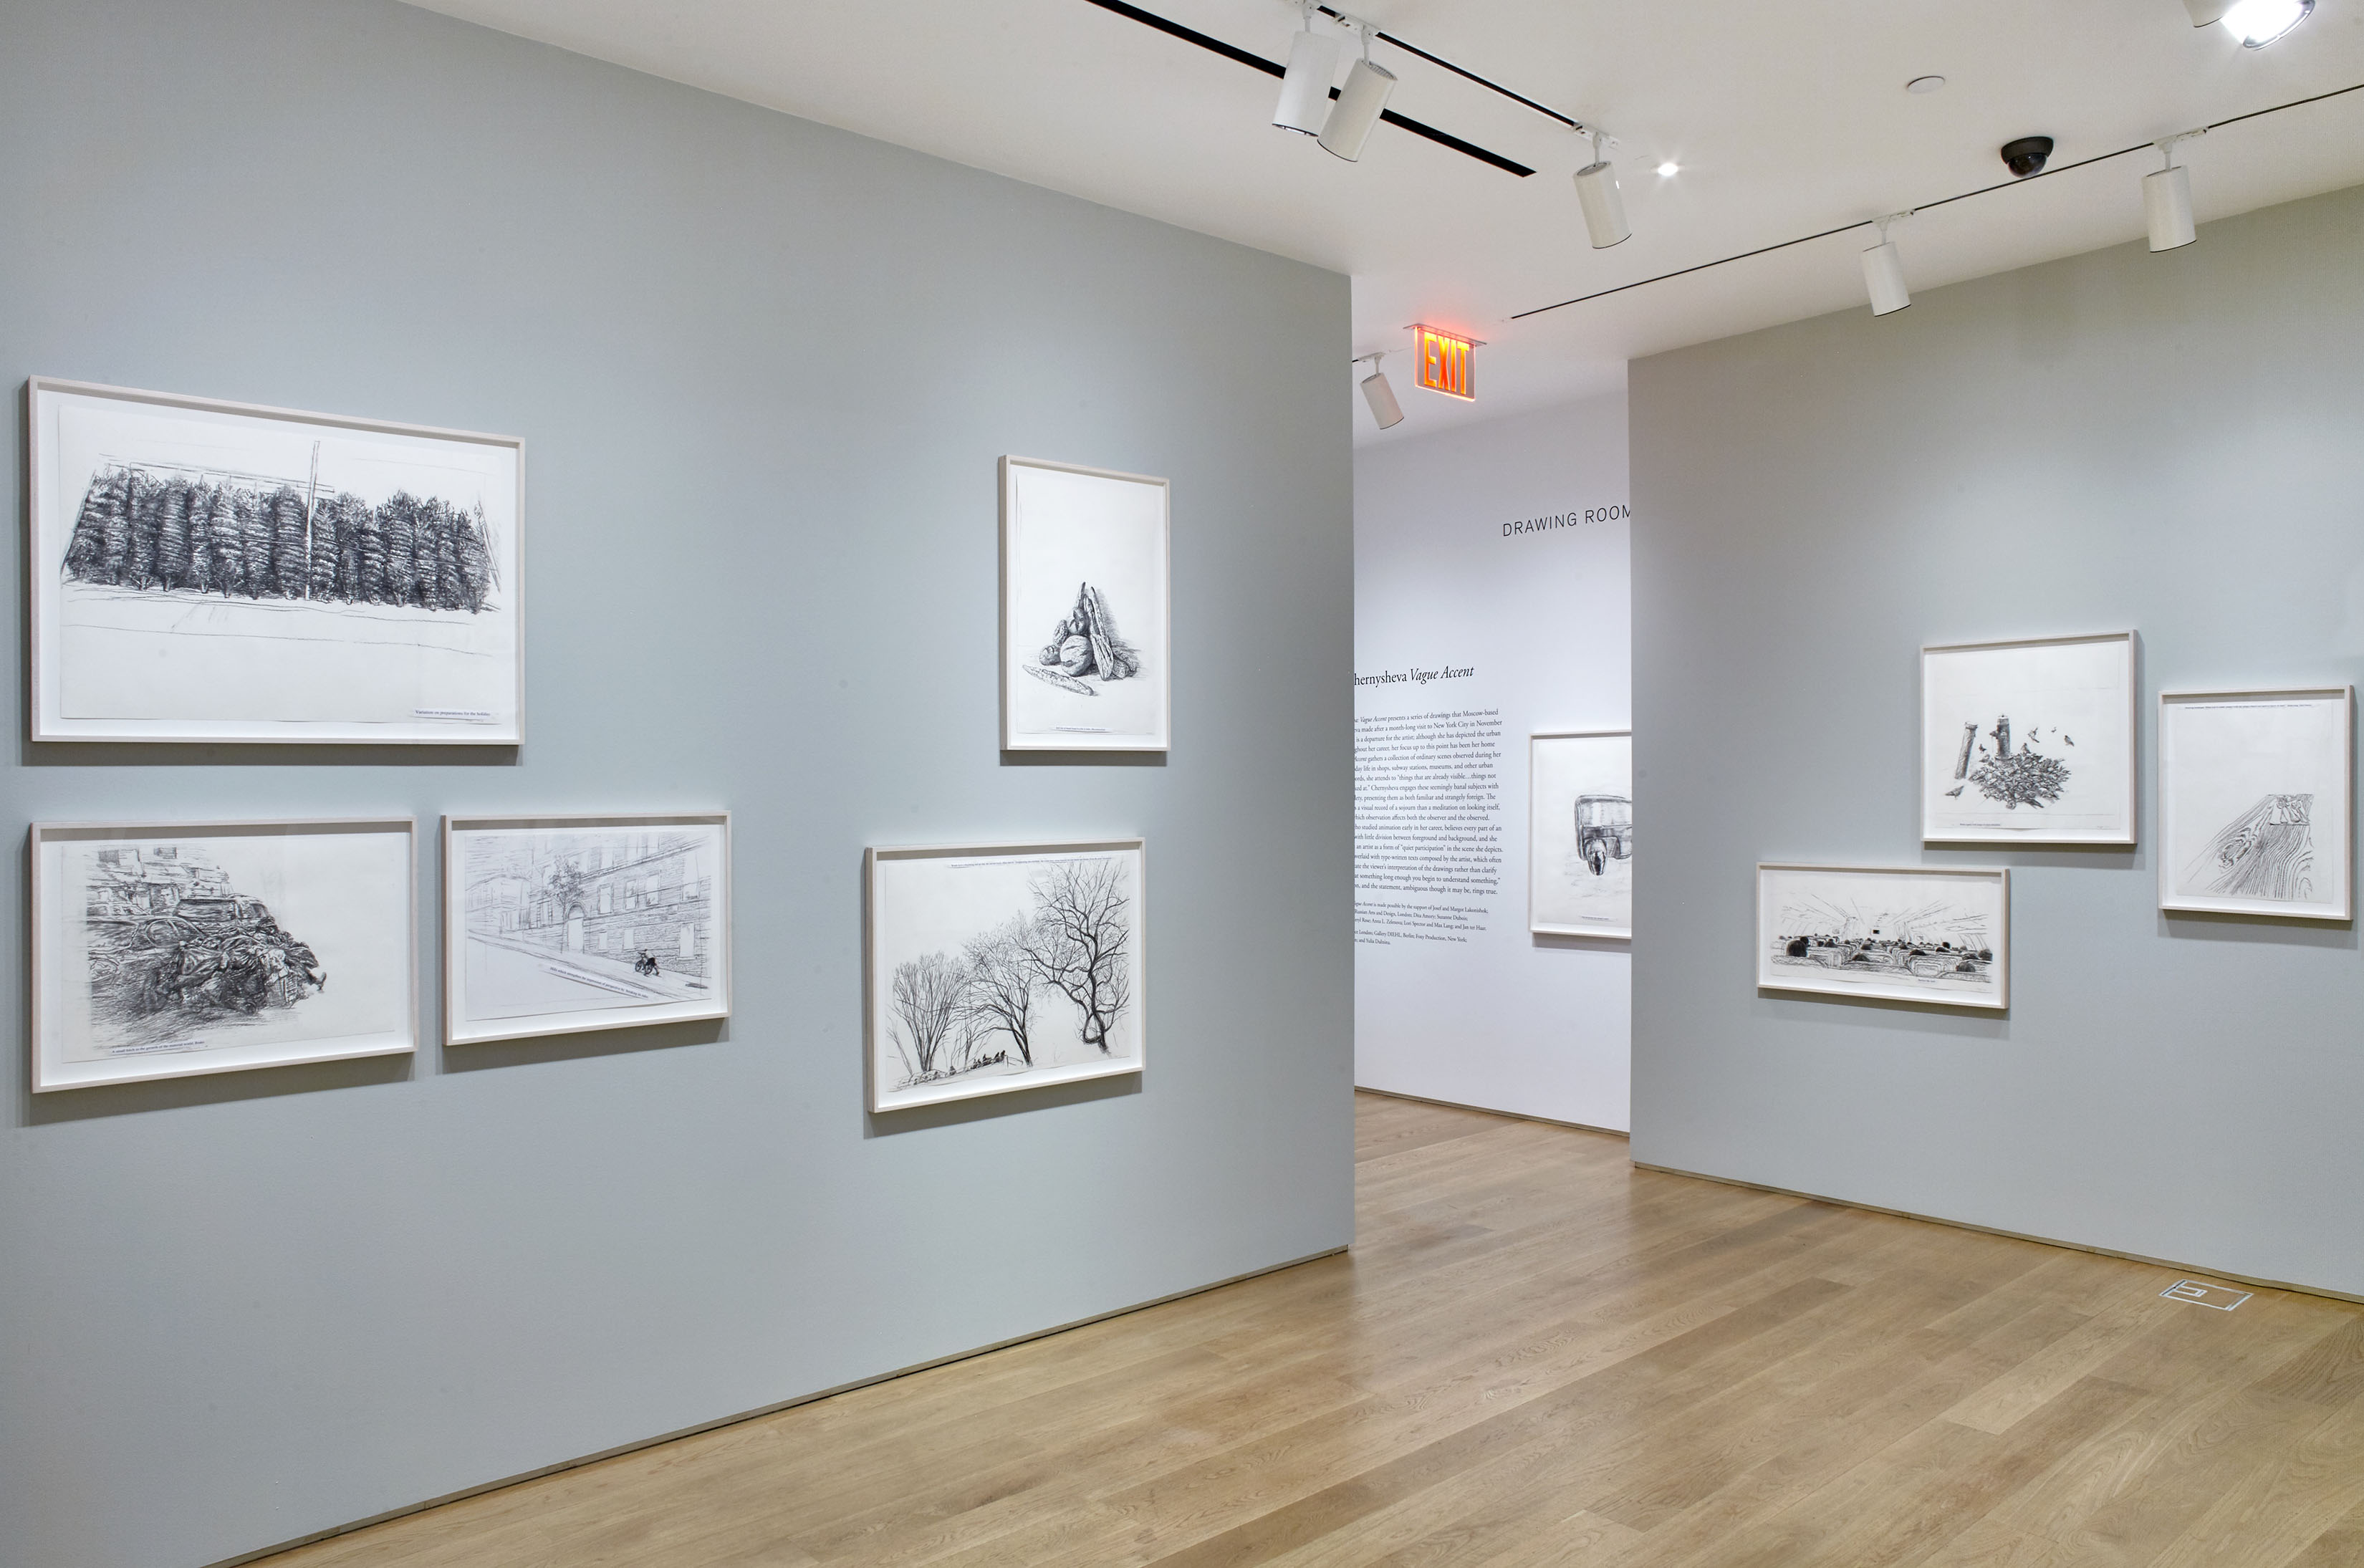 “Olga Chernysheva: Vague Accent,” Installation view at The Drawing Center, New York, 2016. Photo by Martin Parsekian. Image courtesy The Drawing Center.